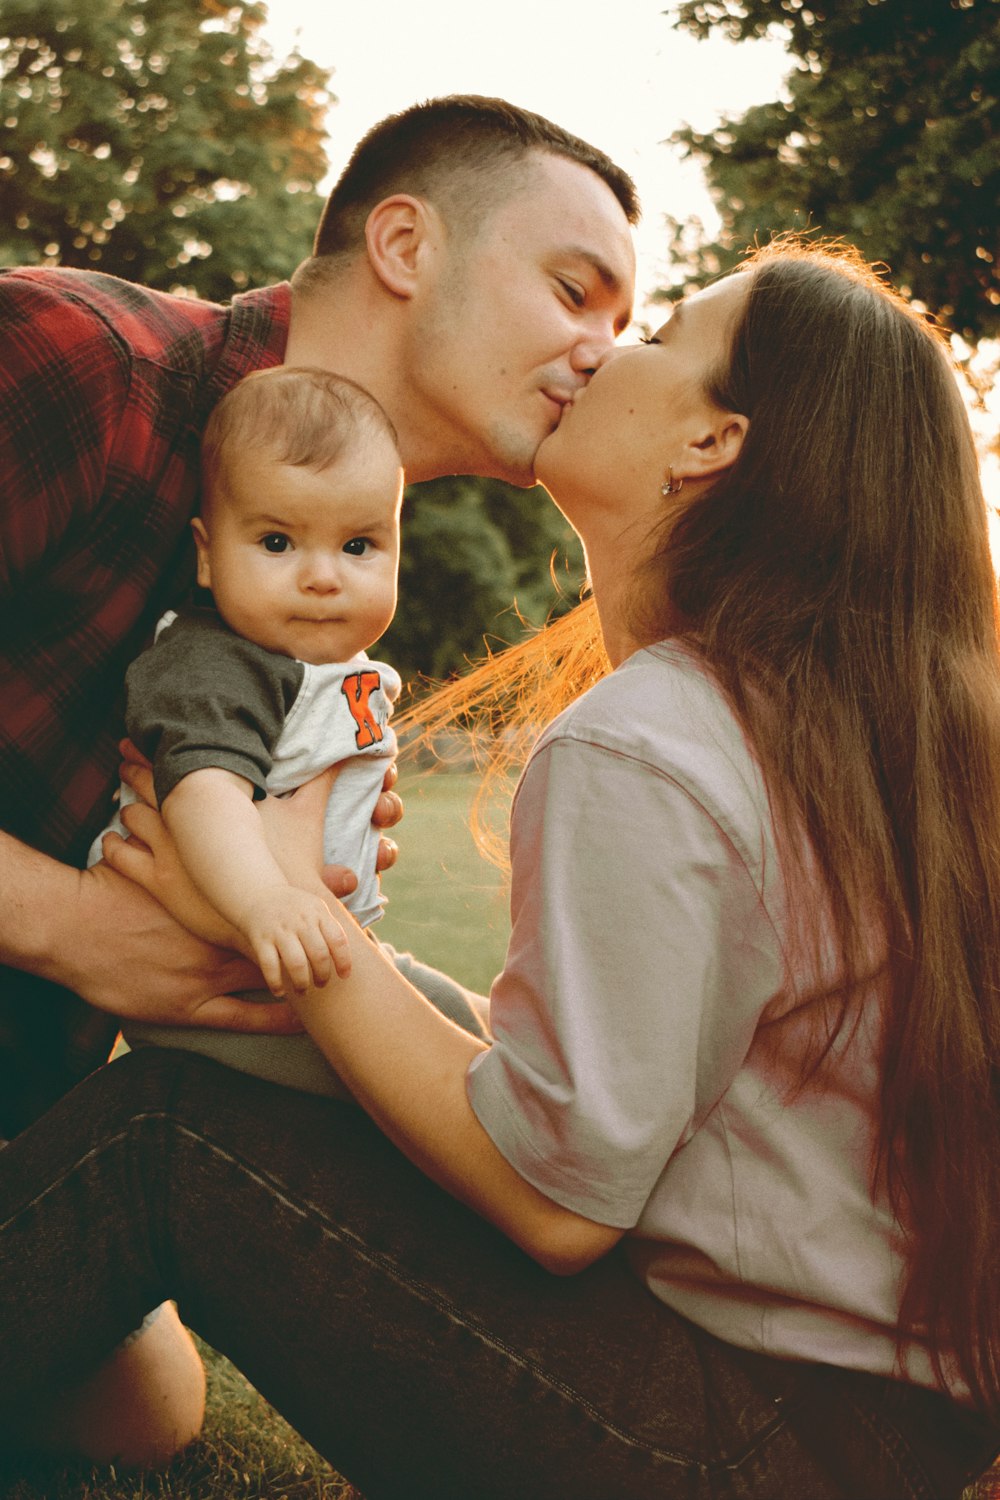 a man kissing a woman while holding a baby